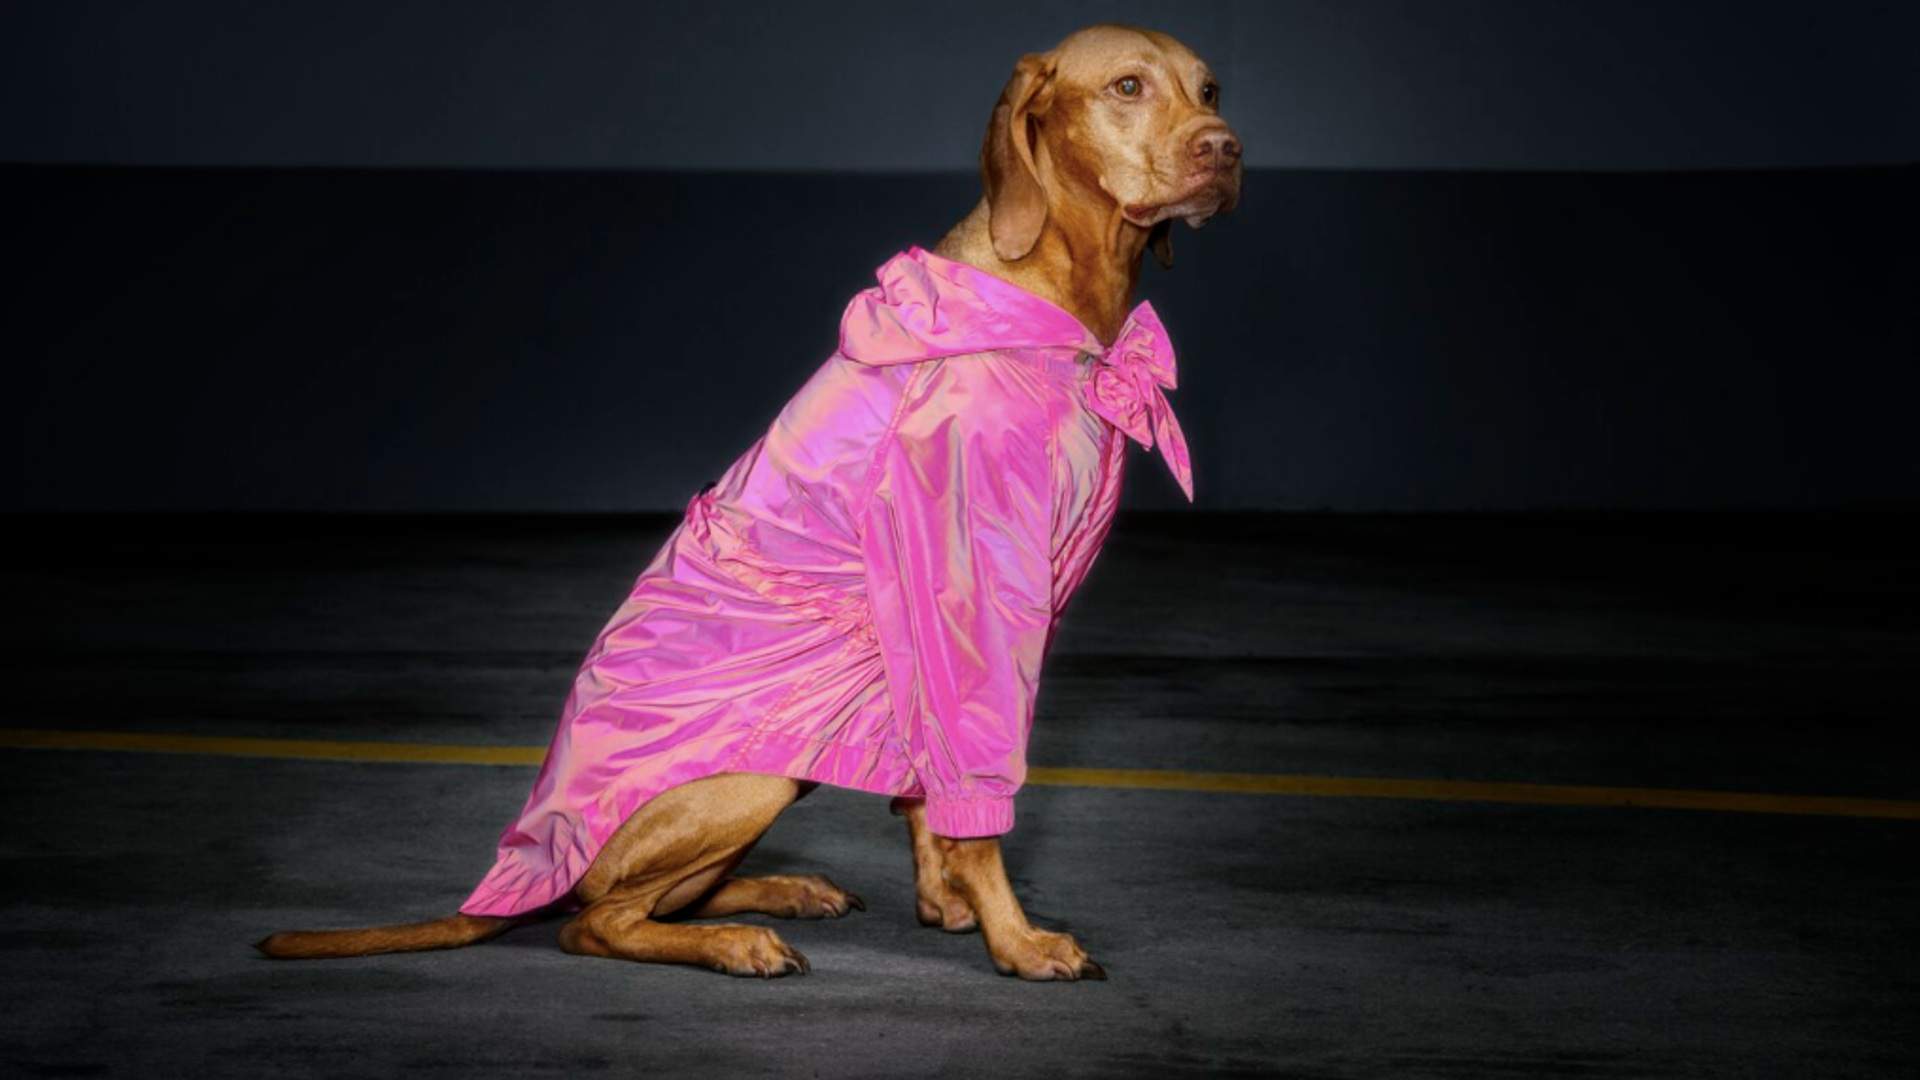 New Zealand's Dogs Can Now Wear High-Fashion, High-Vis Clothing When Walking at Night